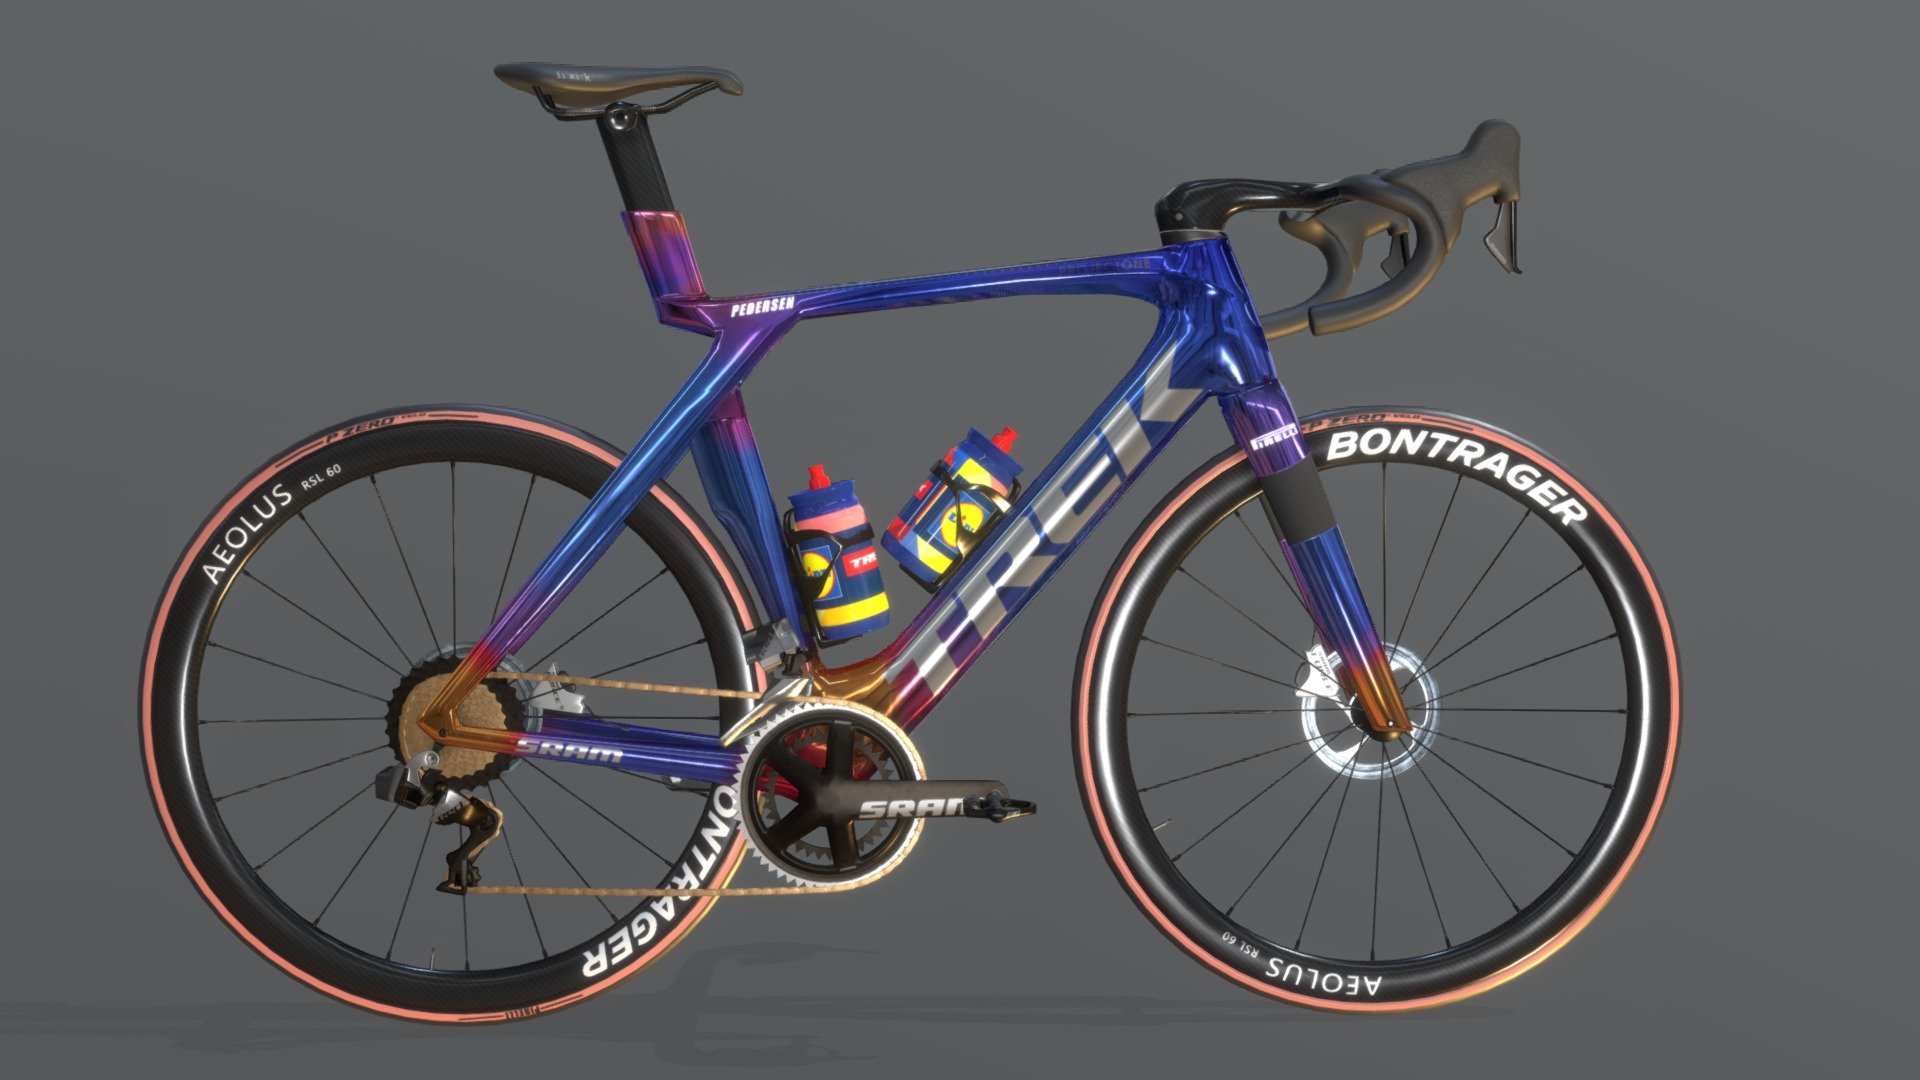 TREK - LIDL Trek Madone roadbike of Mads Pedersen  3D model made in blender, baked from high poly and textured in substance painter. It consist of 65k faces. Bike consist of 18 objects. All of them are on the single UV layout. Baked maps are in 4k so it possible to downgrade if needed. Eight maps baked: base color, roughness, metallic, normal, ambient occlusiom, emissive, displacement, alpha 3d model